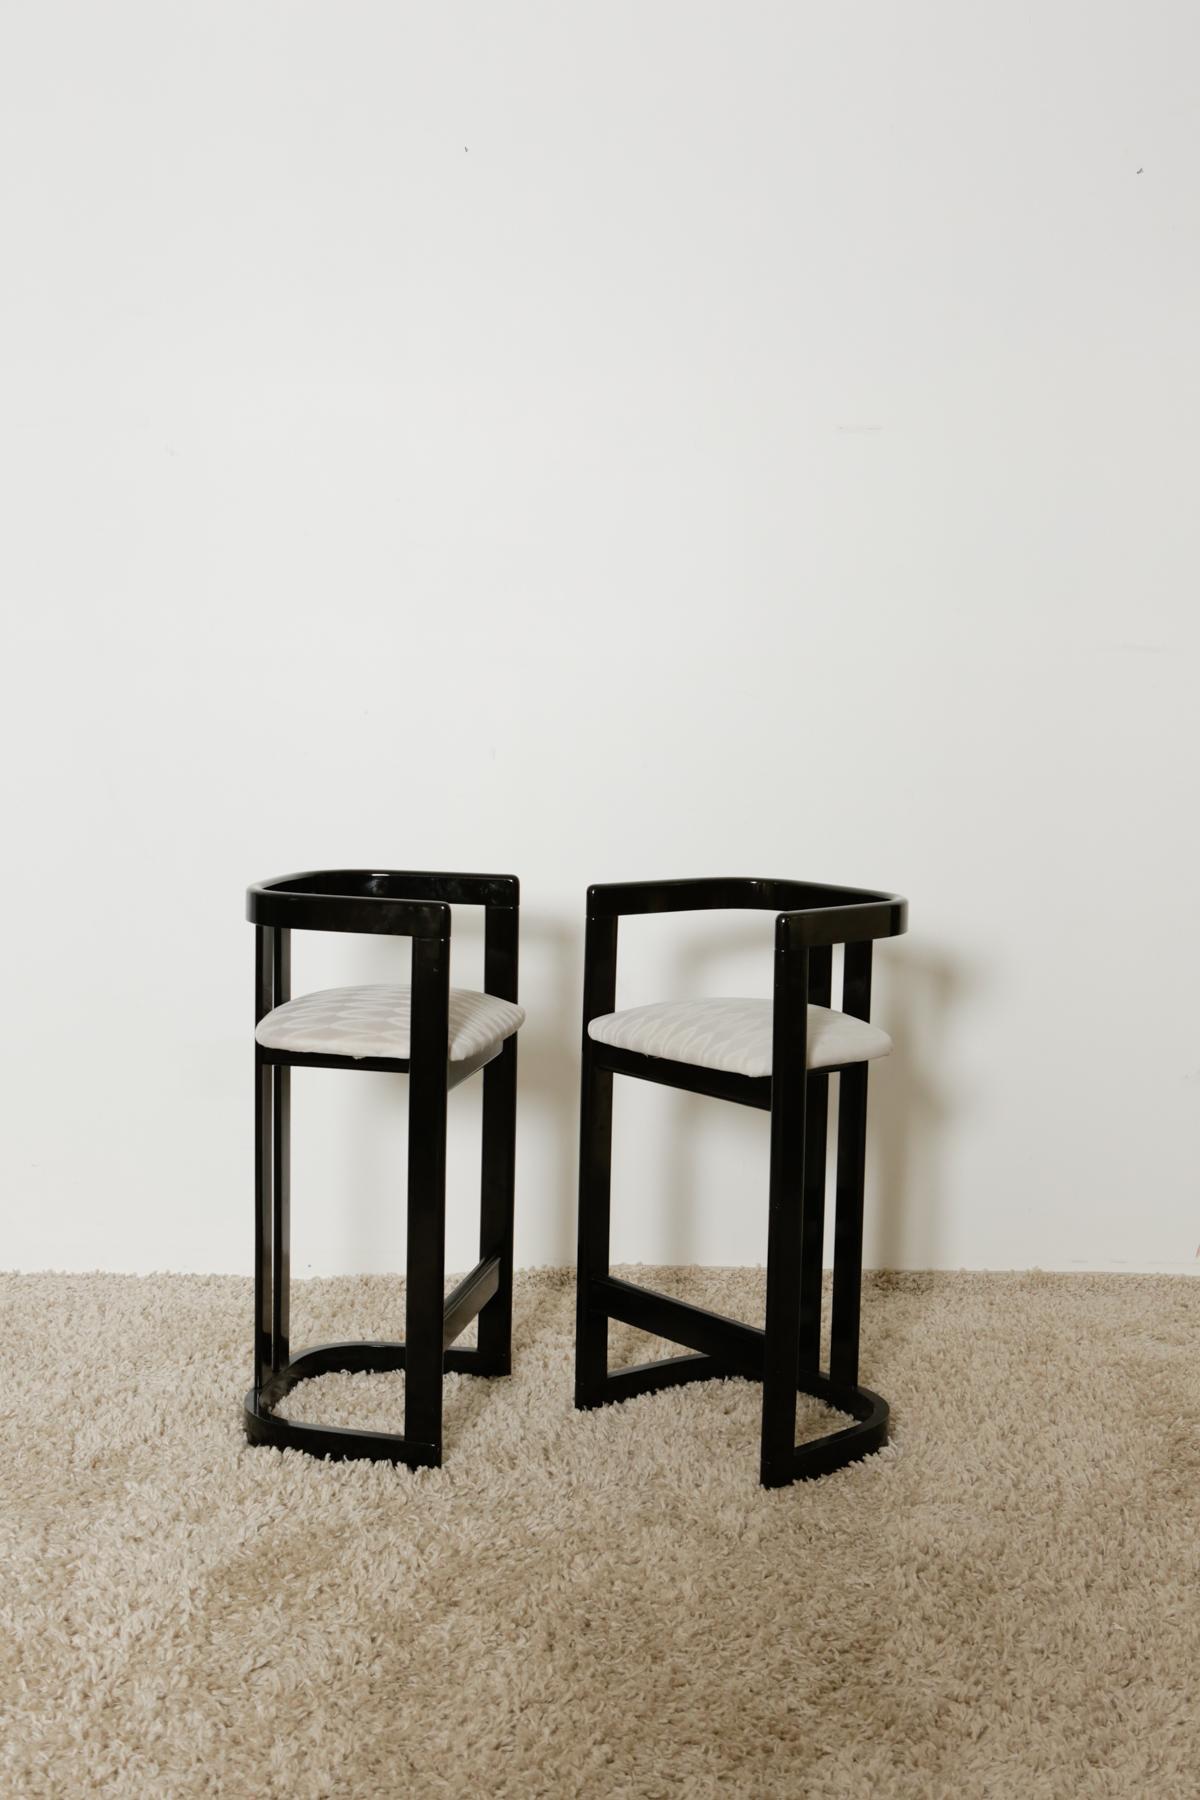 Karl Springer “Onassis” style 1980s black lacquer bar stools as a set

Karl Springer “Onassis” style 1980s black lacquer bar stools. Sleek modern and comfortable seating, best paired with your favorite beverage and snack. Held together by a